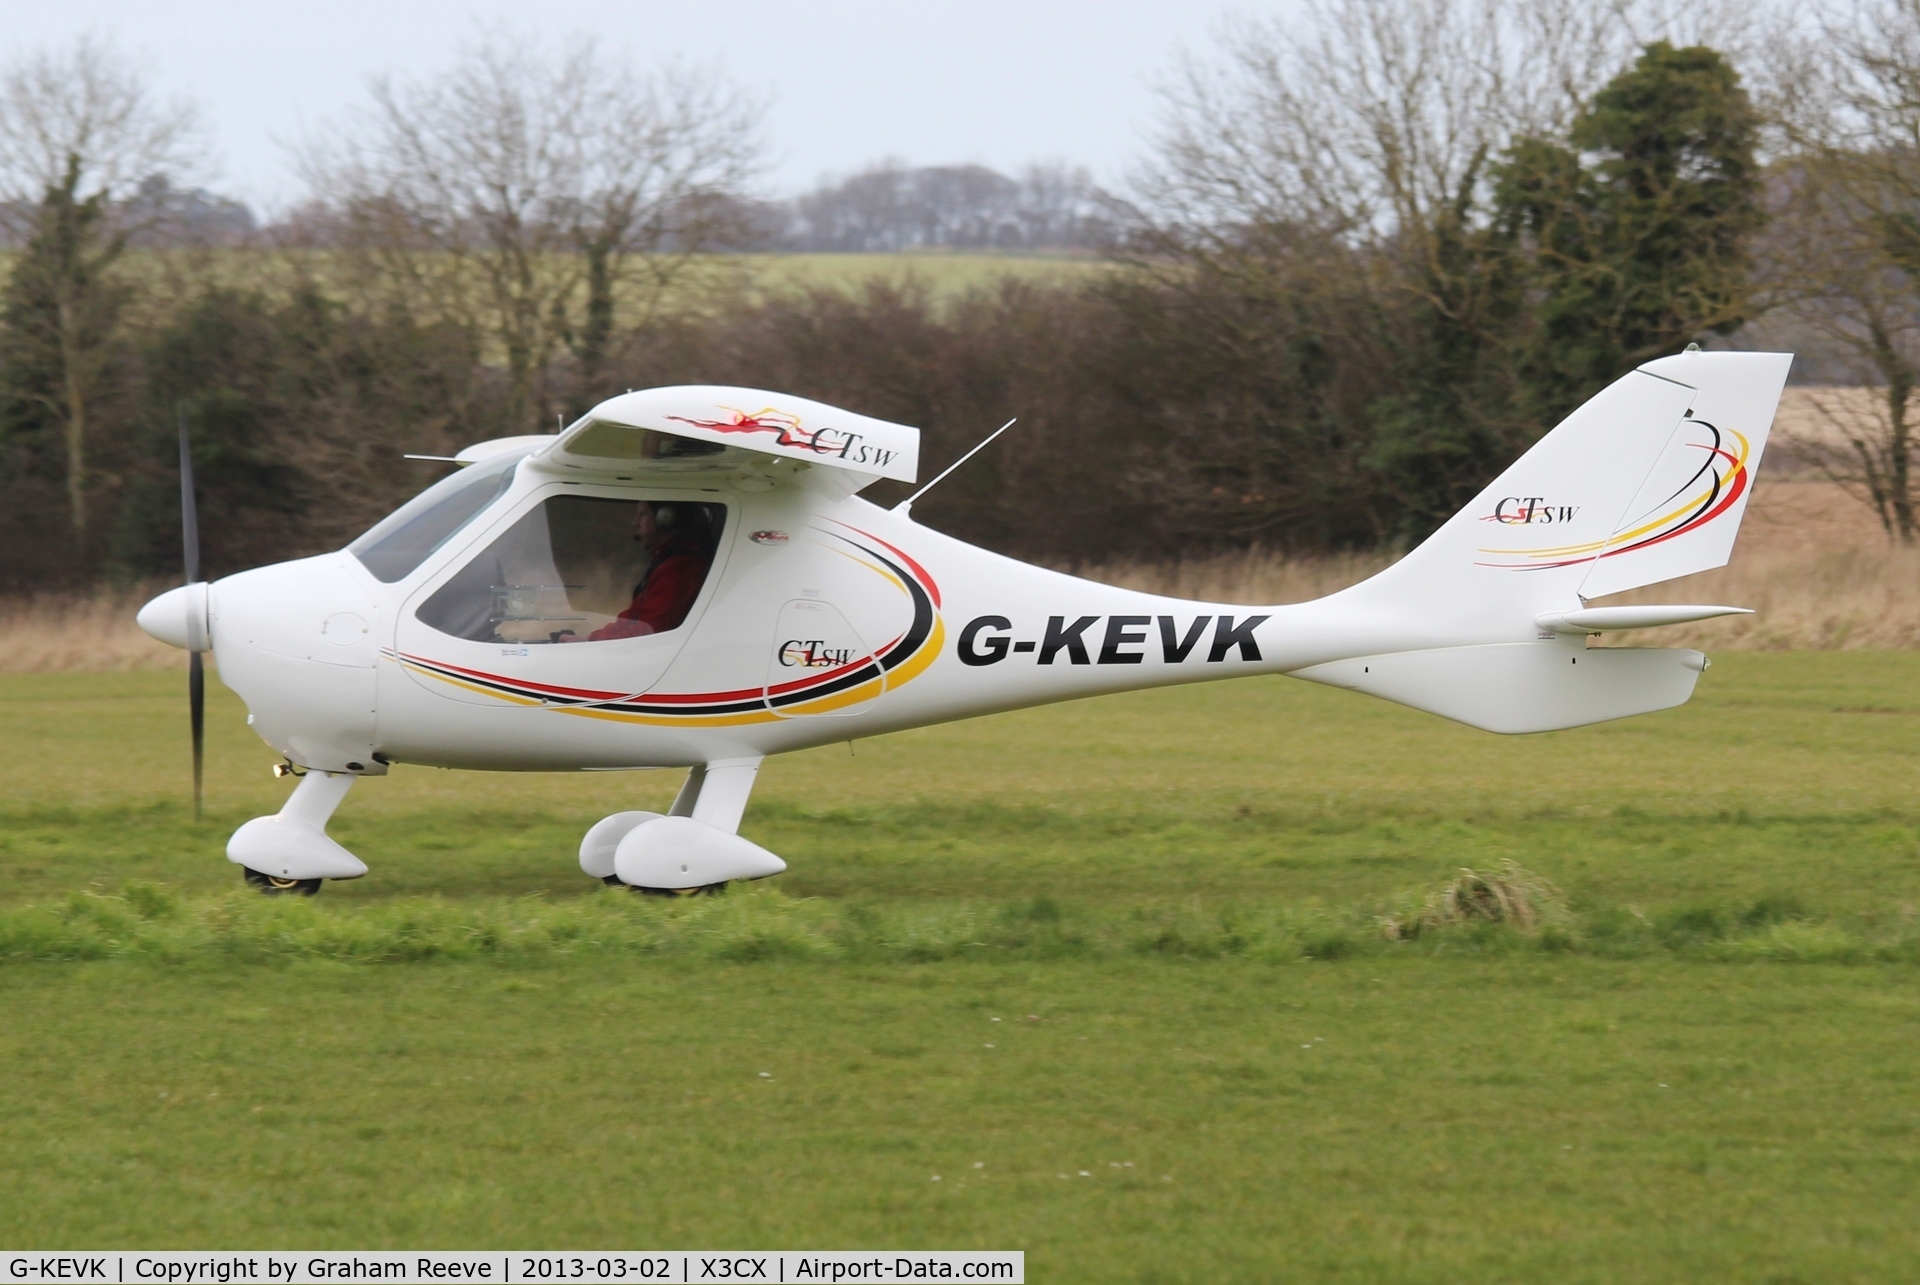 G-KEVK, 2009 Flight Design CTSW C/N 8483, About to depart from Northrepps.